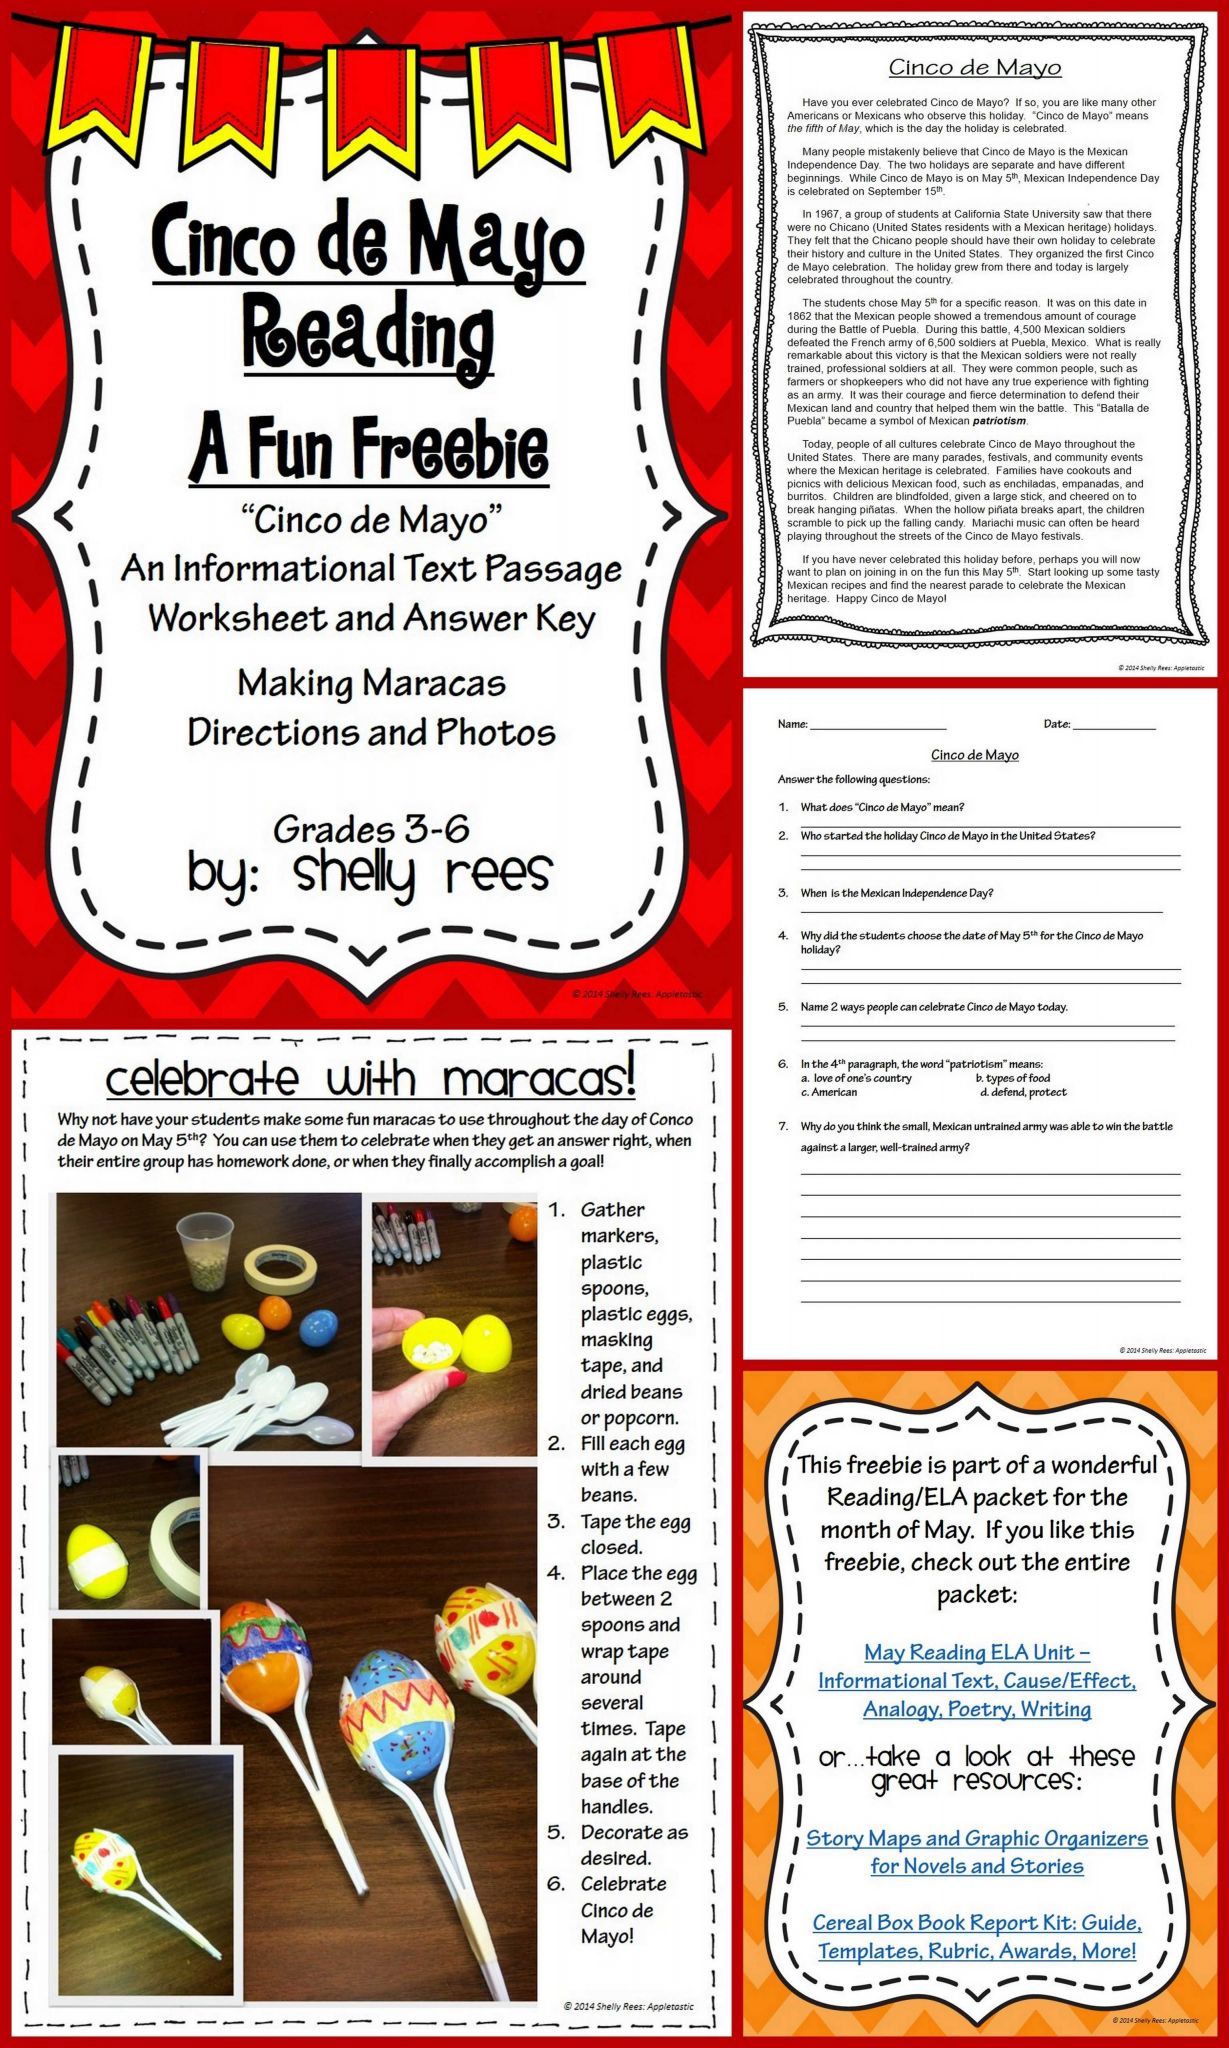 Interest Groups Worksheet Answers Along with Cinco De Mayo Free Informational Text Passage for Grades 3 6